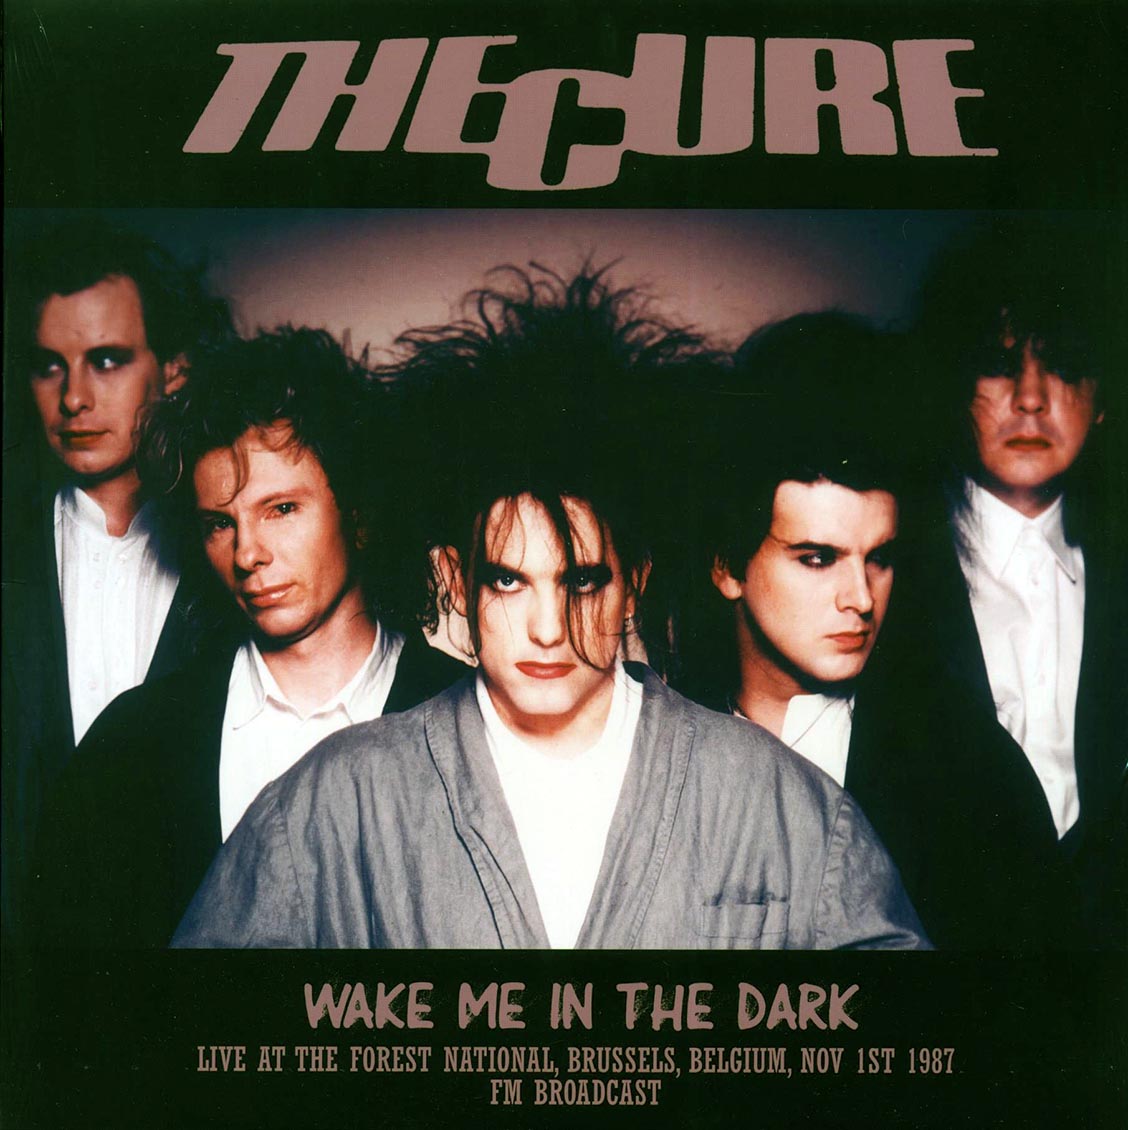 The Cure - Wake Me In The Dark: Live At The Forest National, Brussels, Belgium, Nov 1st 1987 - Vinyl LP